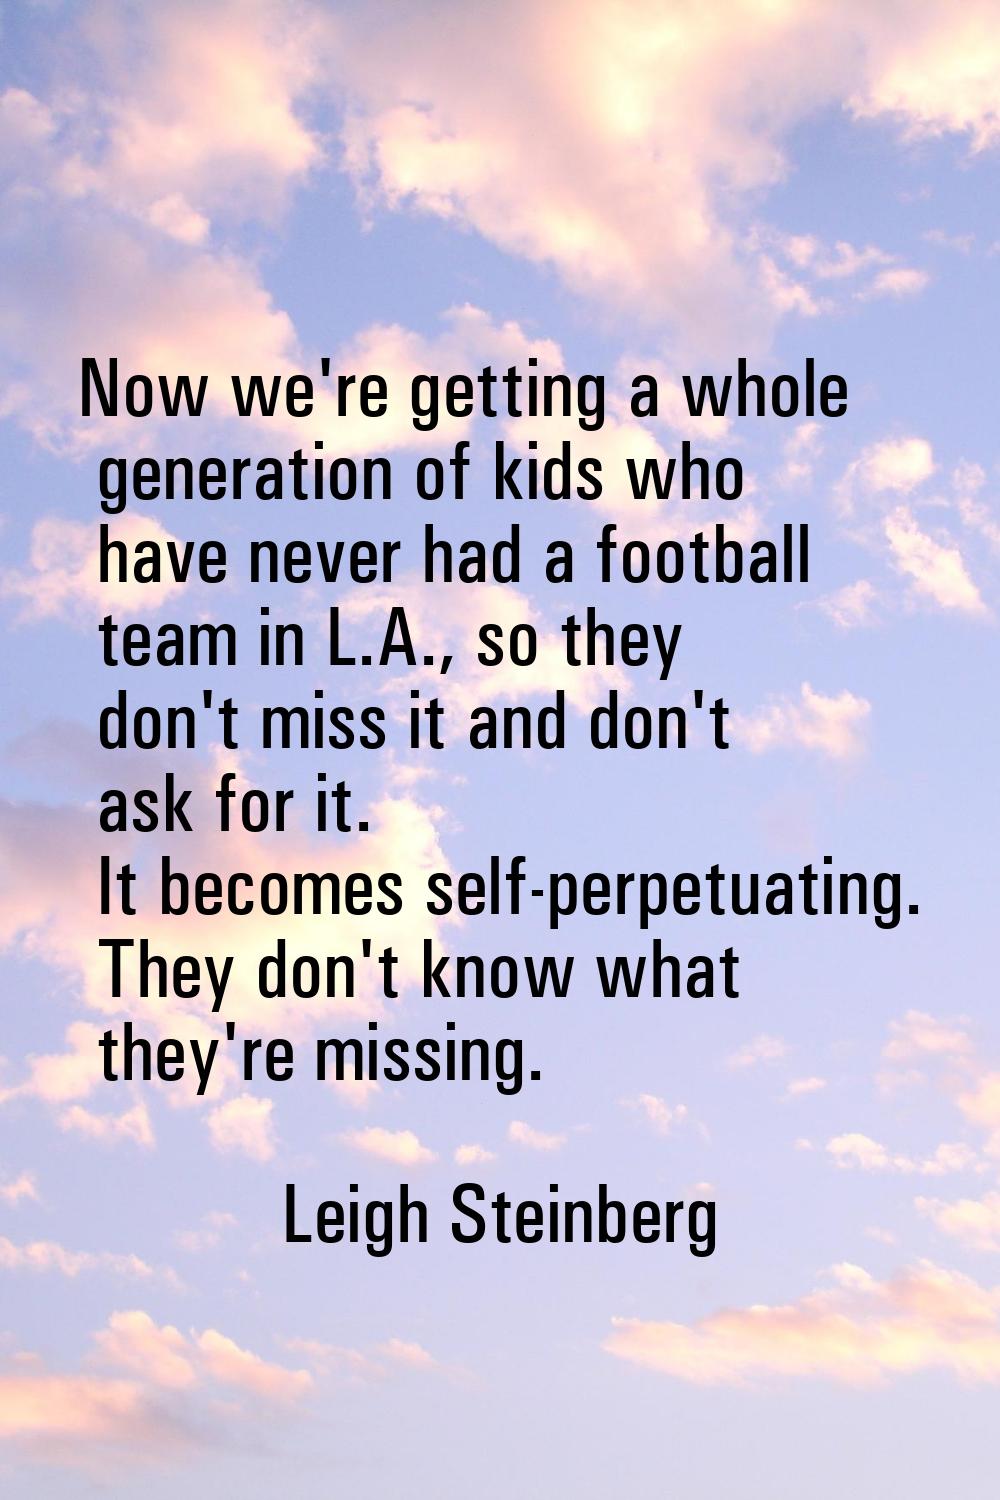 Now we're getting a whole generation of kids who have never had a football team in L.A., so they do